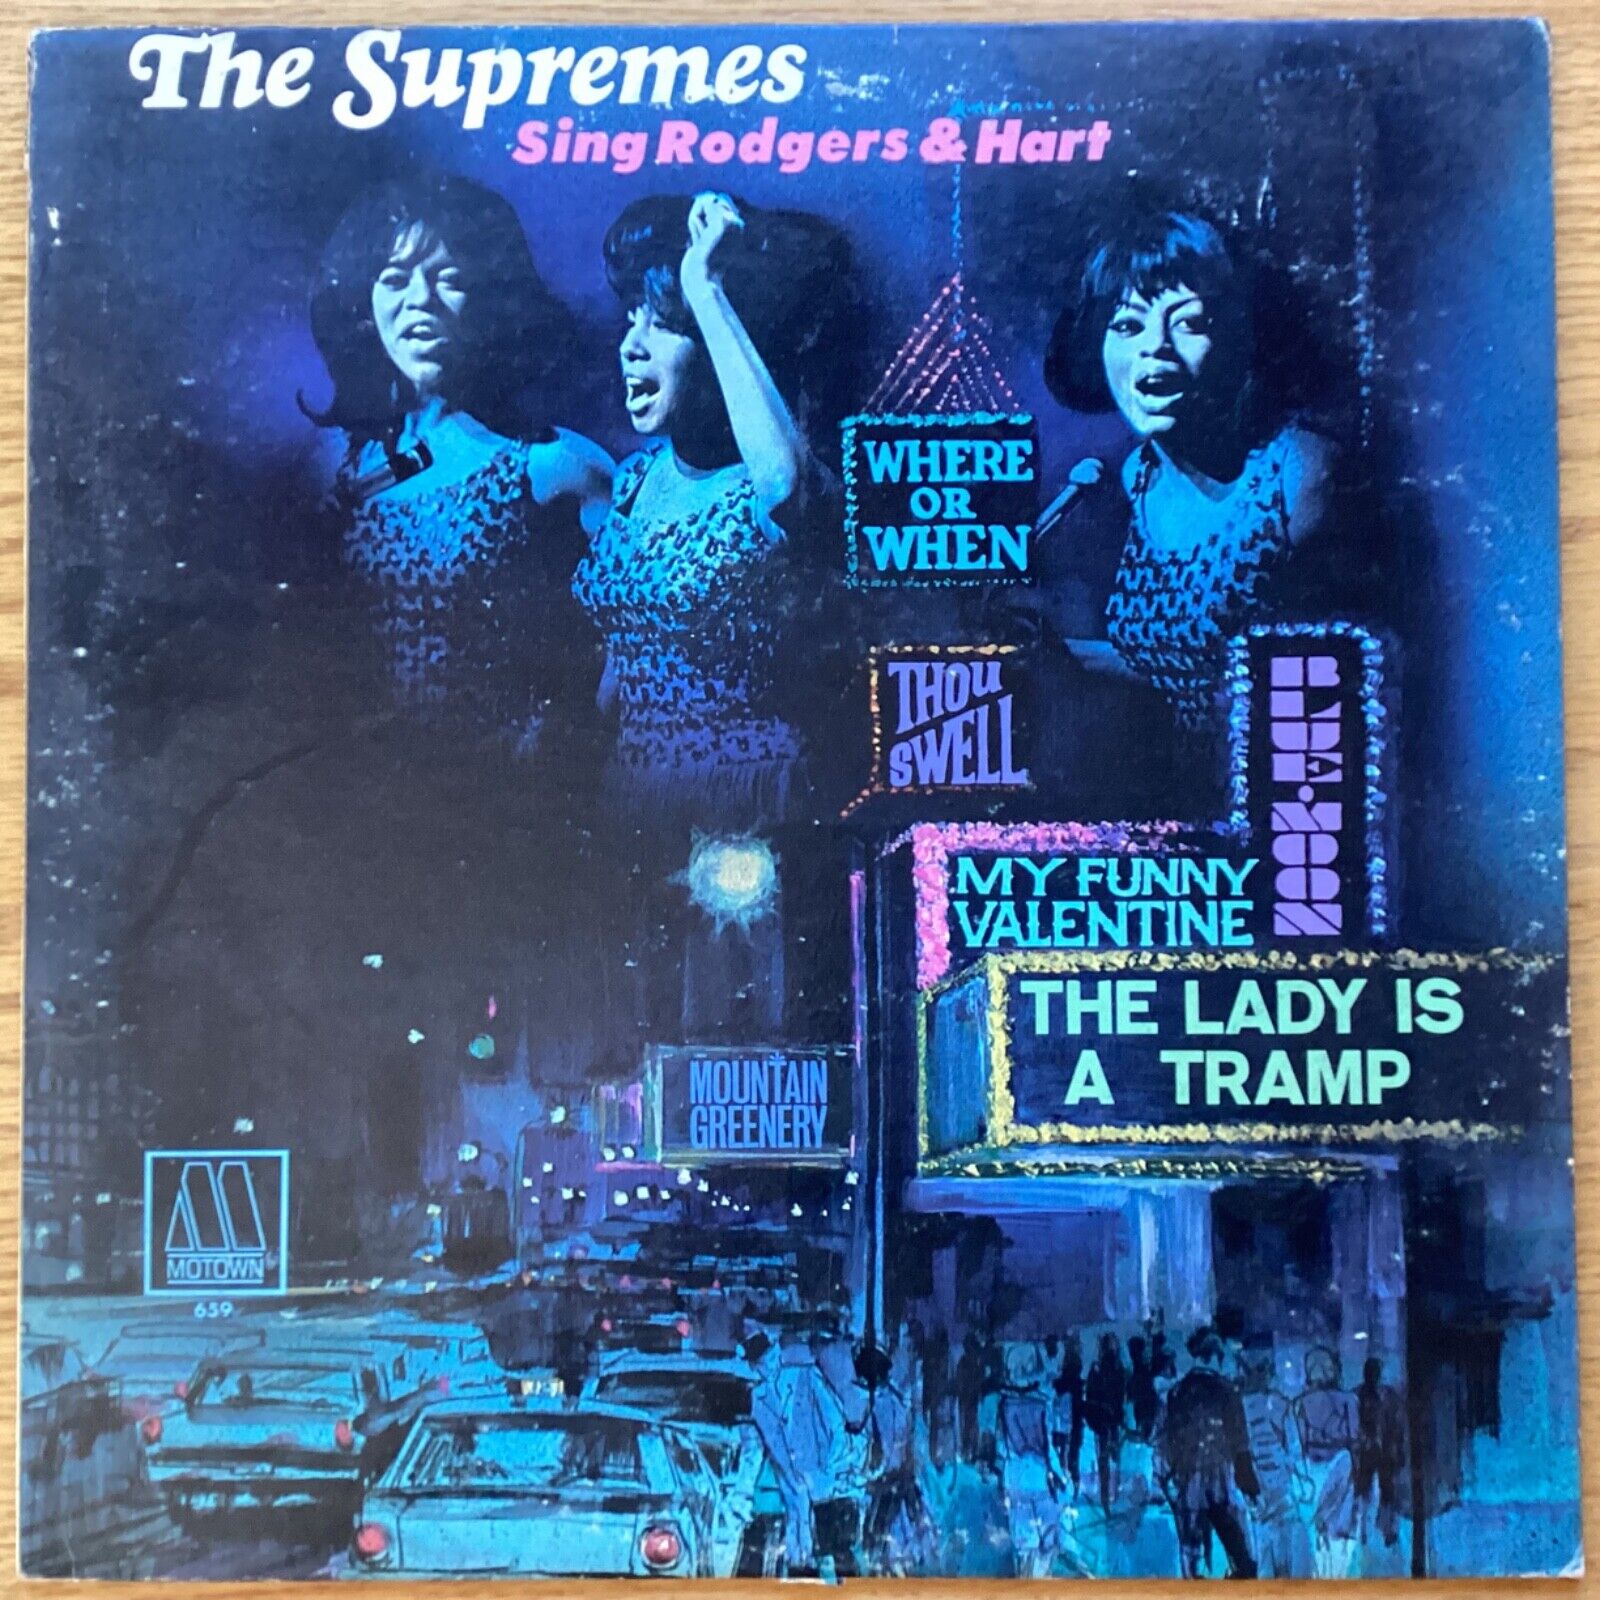 The Supremes “Supremes Sing Rodgers And Hart” 33 1/3 rpm LP, MT659